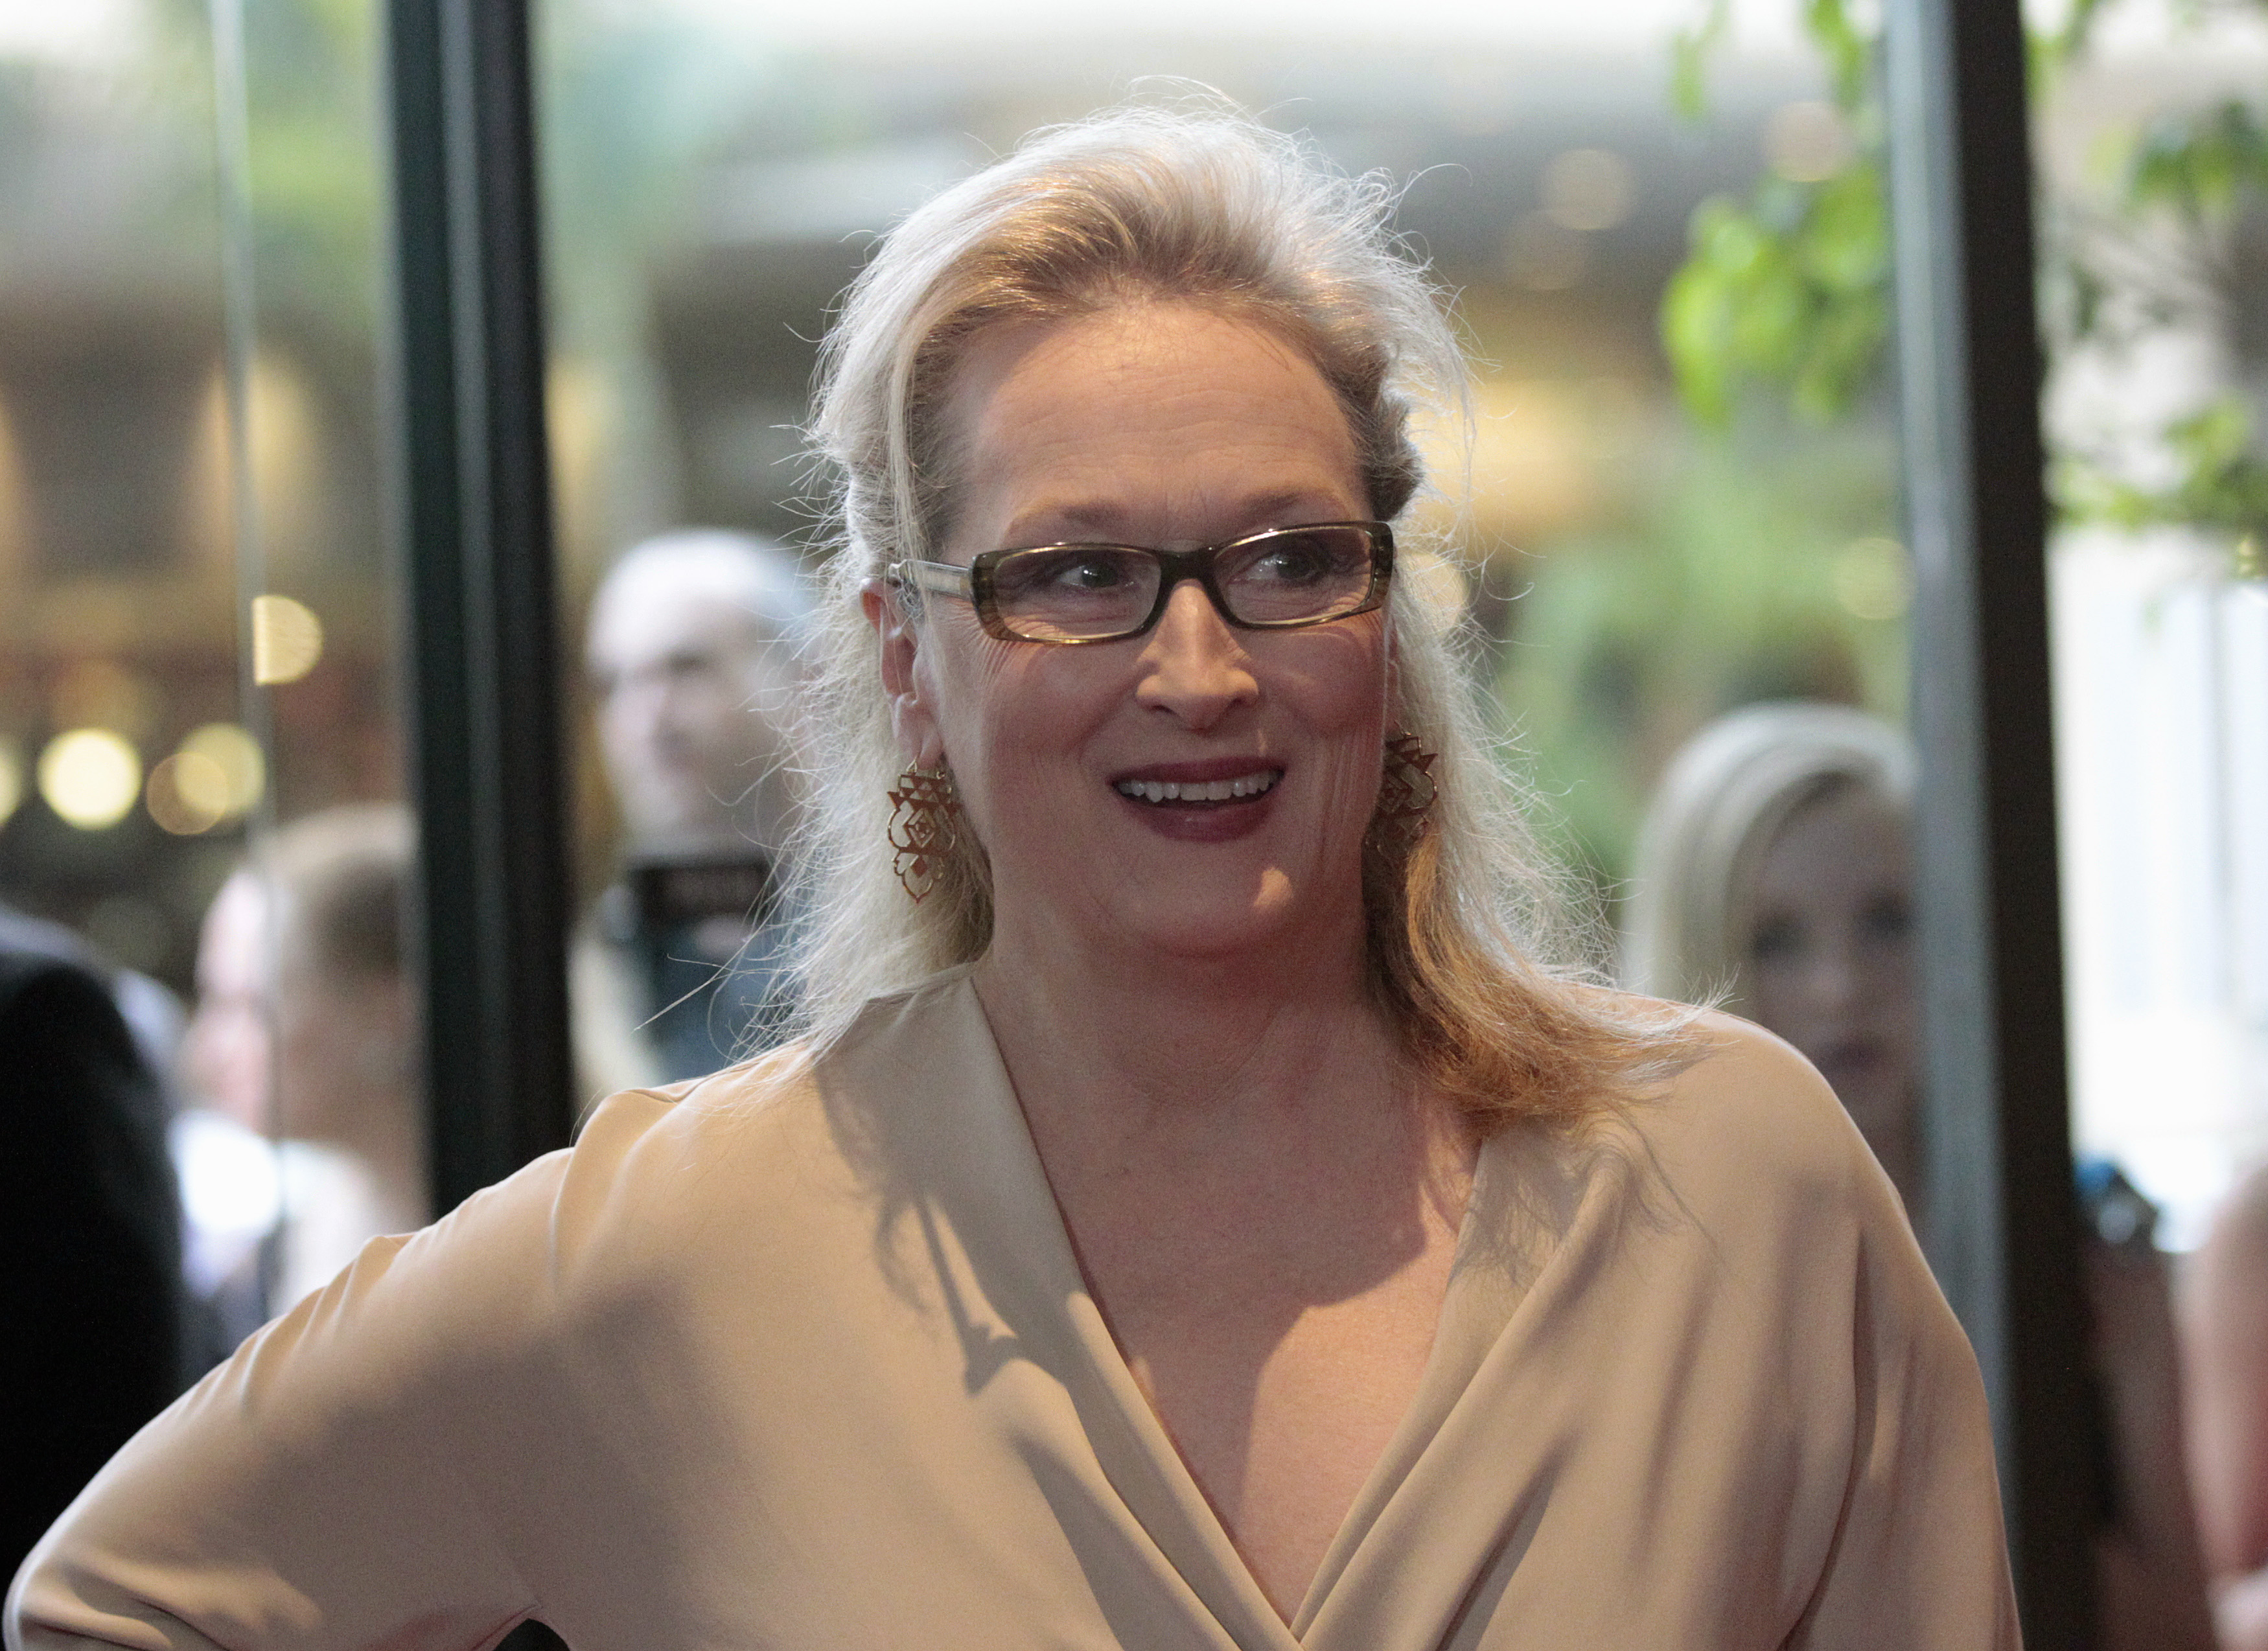 Does Meryl Streep Own a Sunset Strip Residence? | Realty Today